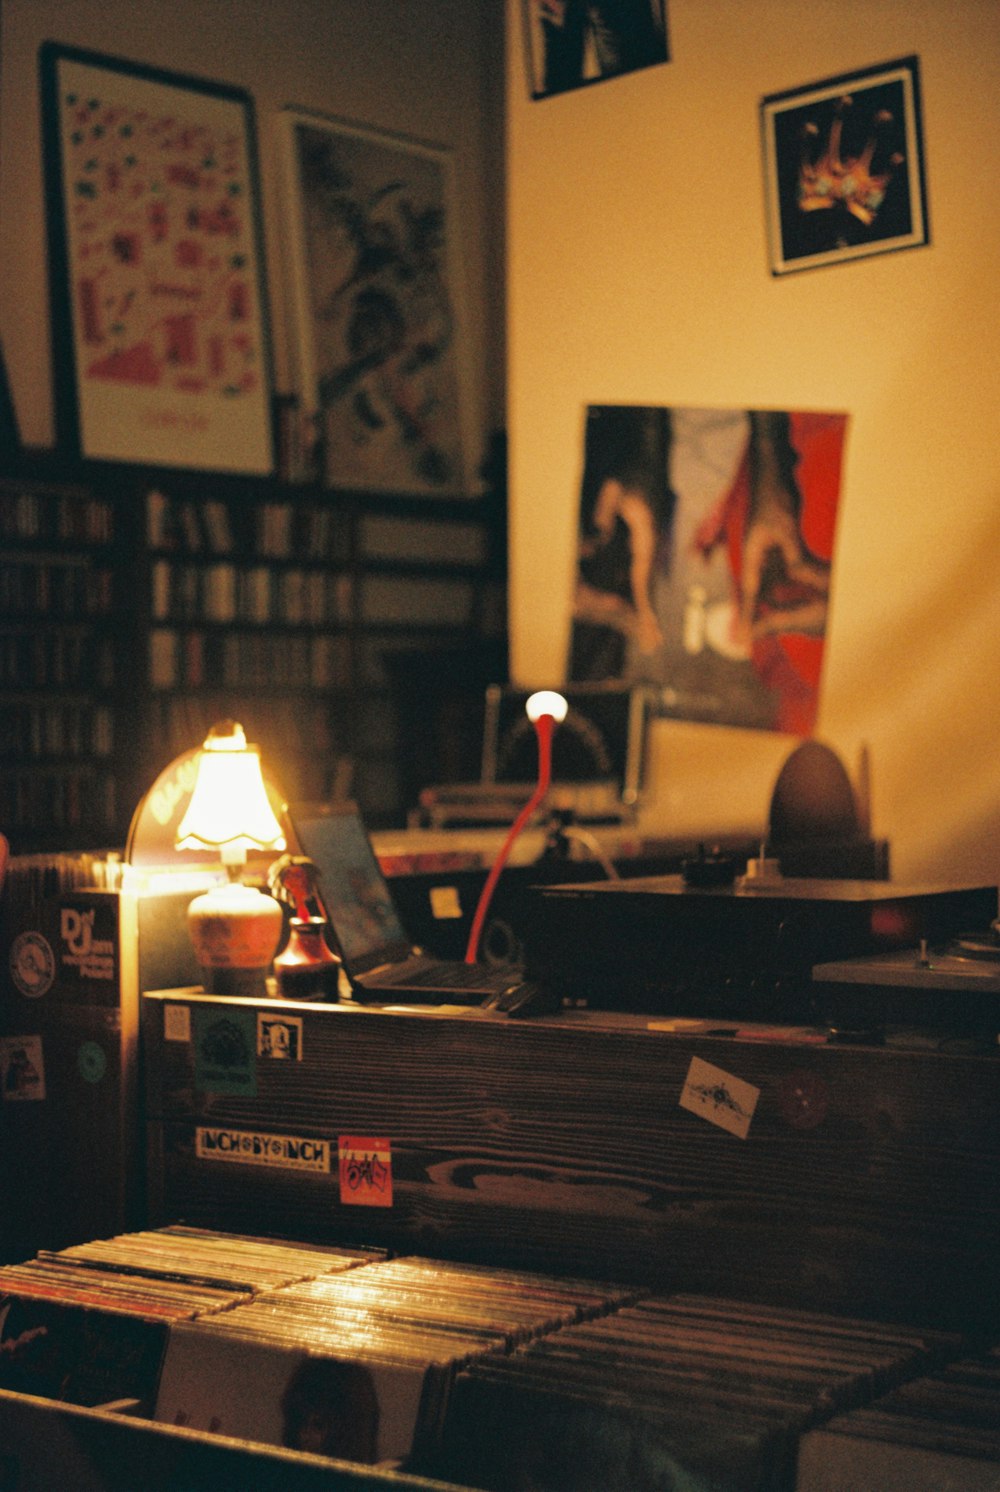 a room filled with lots of records and a lamp